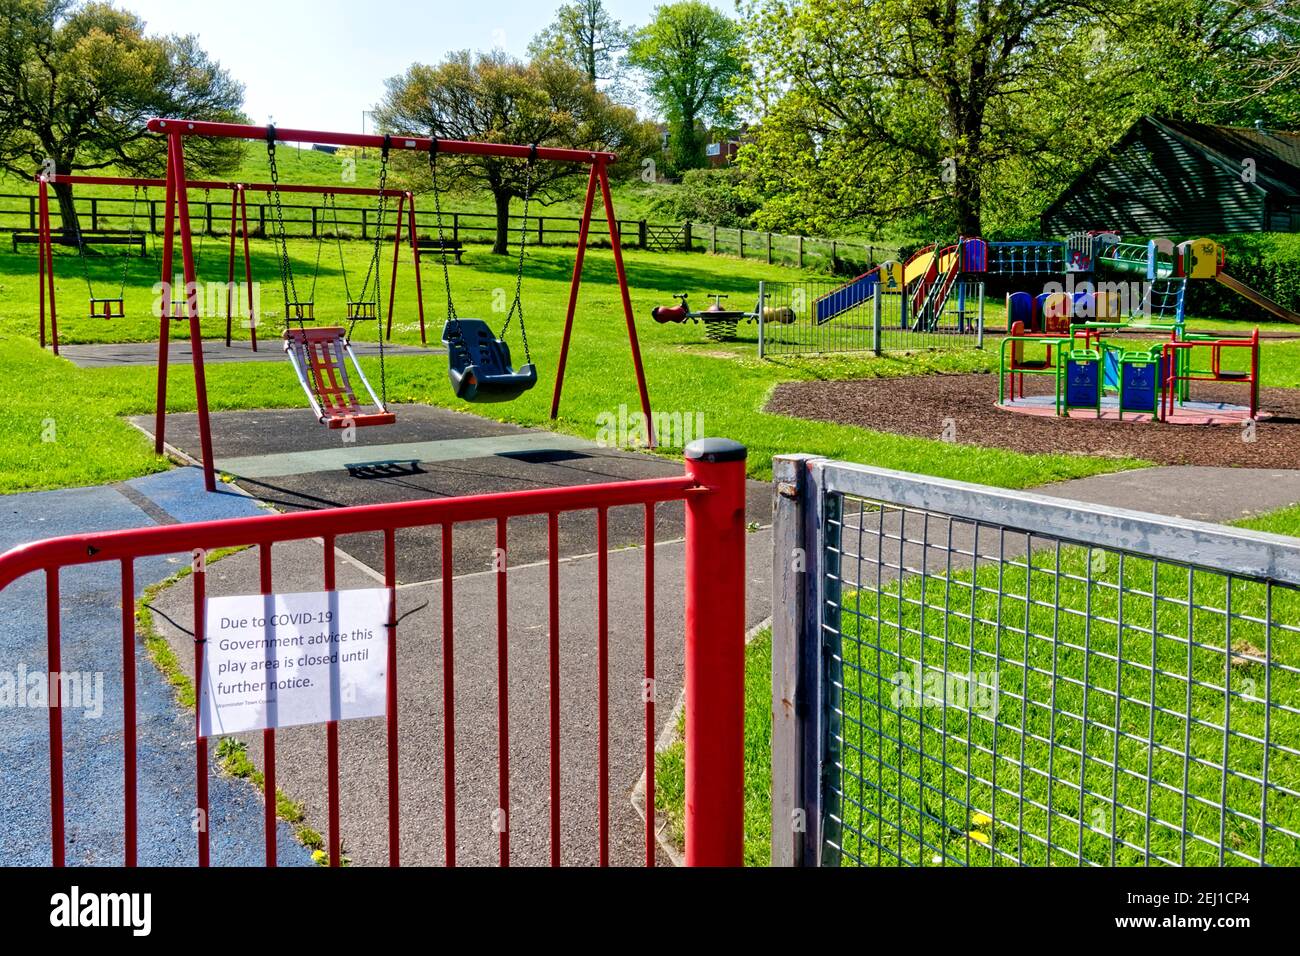 Warminster, Wiltshire  UK - April 23 2020: Warminster town park children's play area is temporarily closed due to Coronavirus Stock Photo